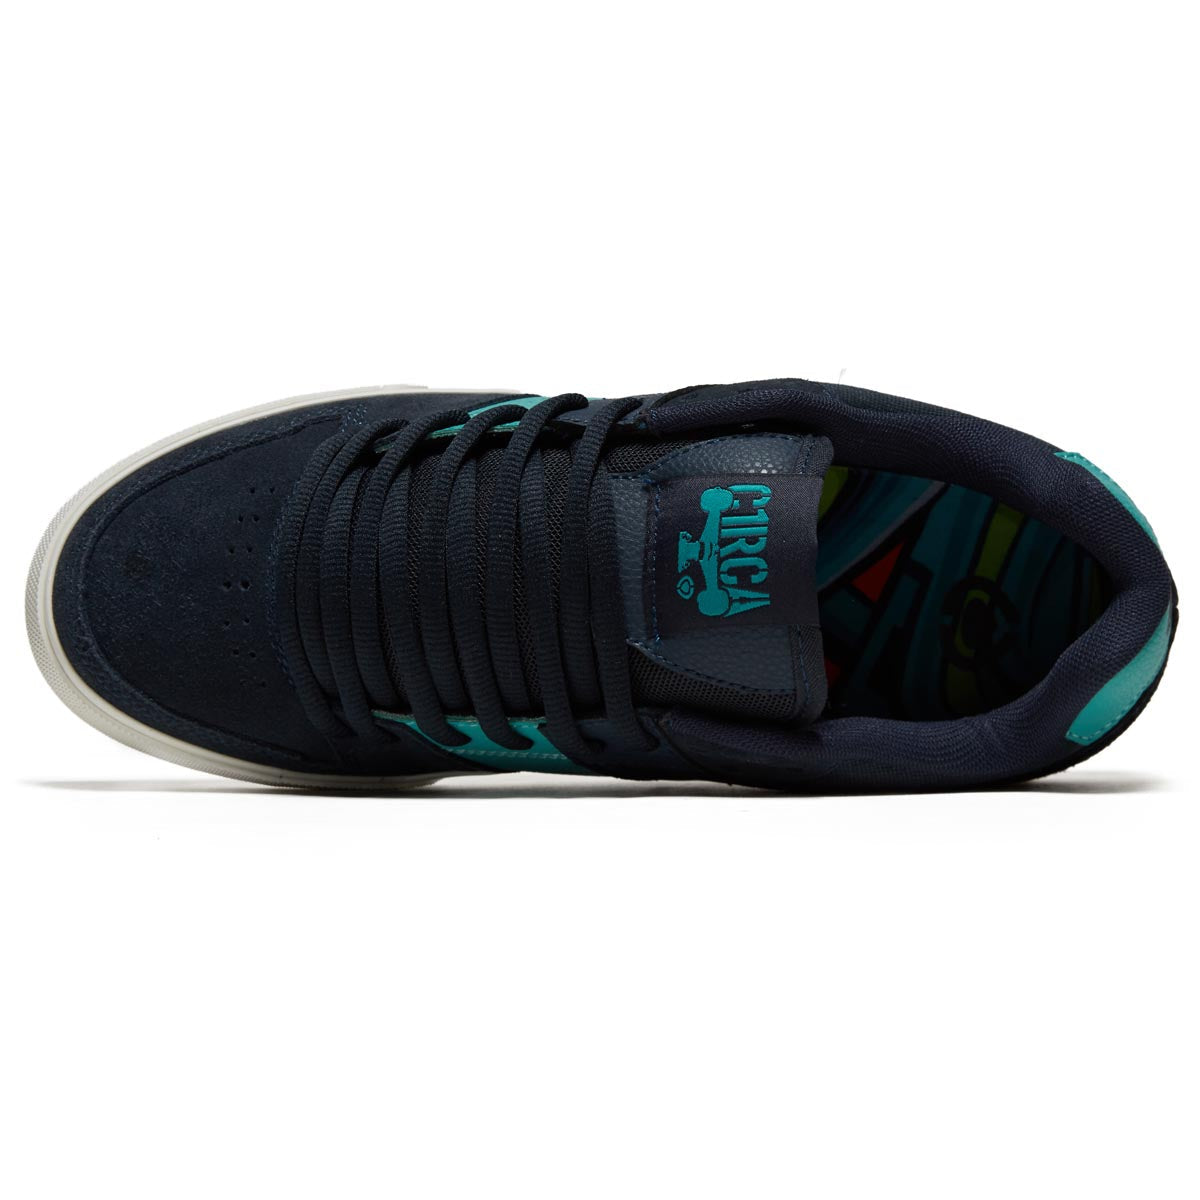 C1rca Widowmaker Shoes - Indian Ink/Sea Blue image 3